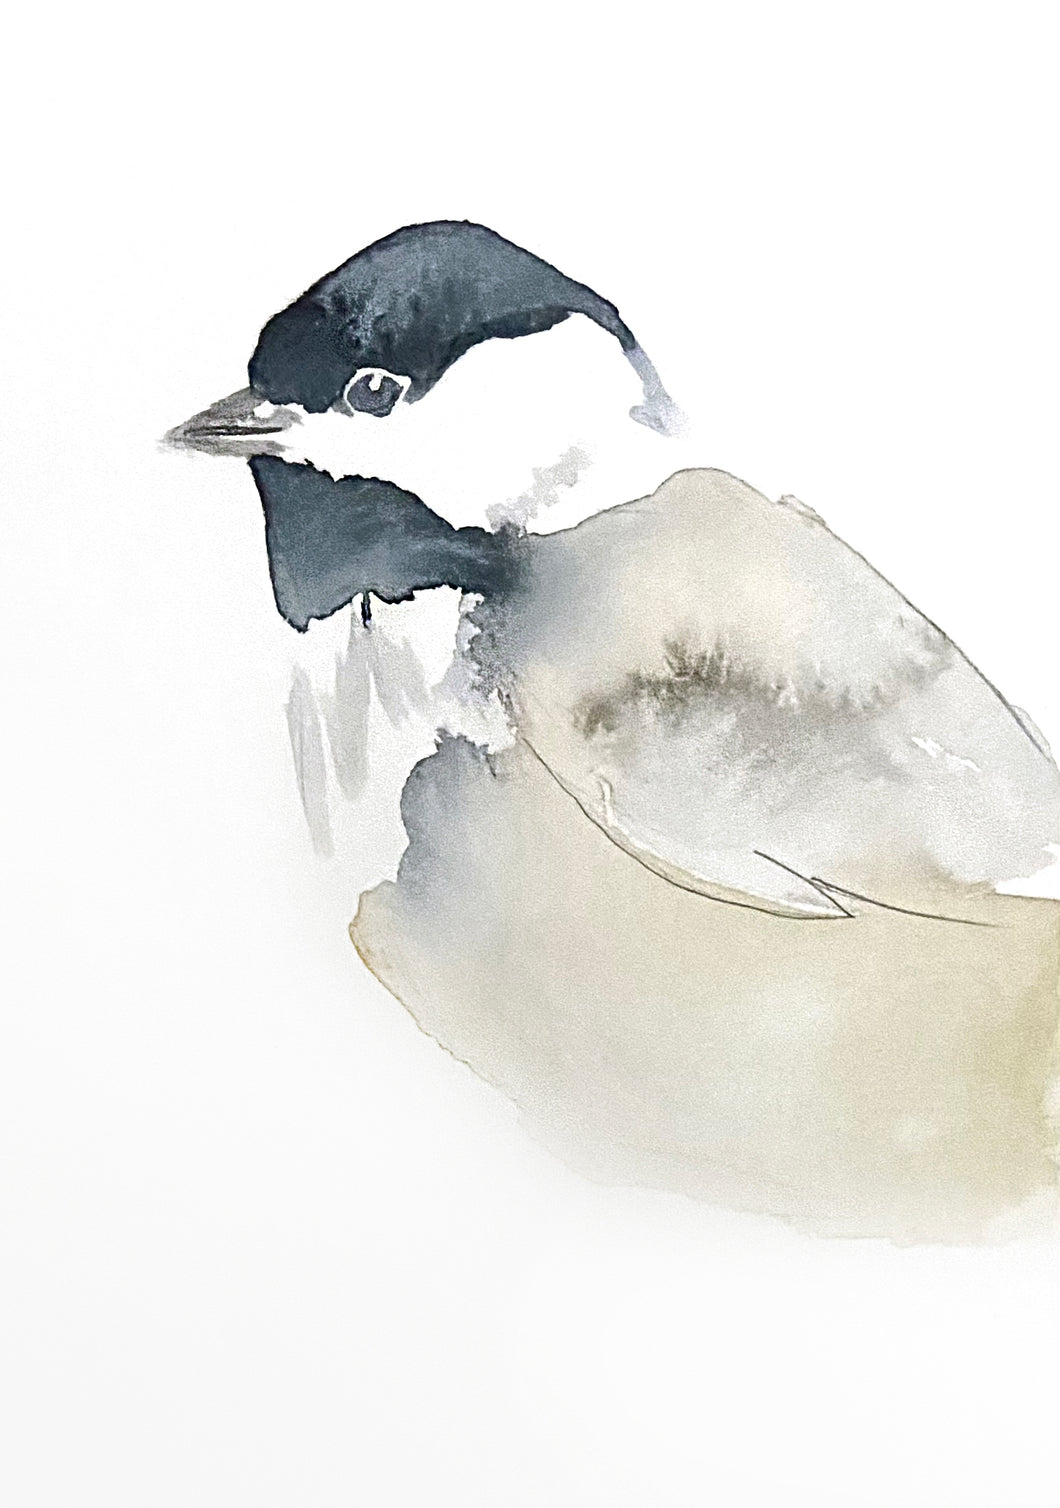 5” x 7” original watercolor wildlife nature chickadee painting in an ethereal, expressive, impressionist, minimalist, modern style by contemporary fine artist Elizabeth Becker